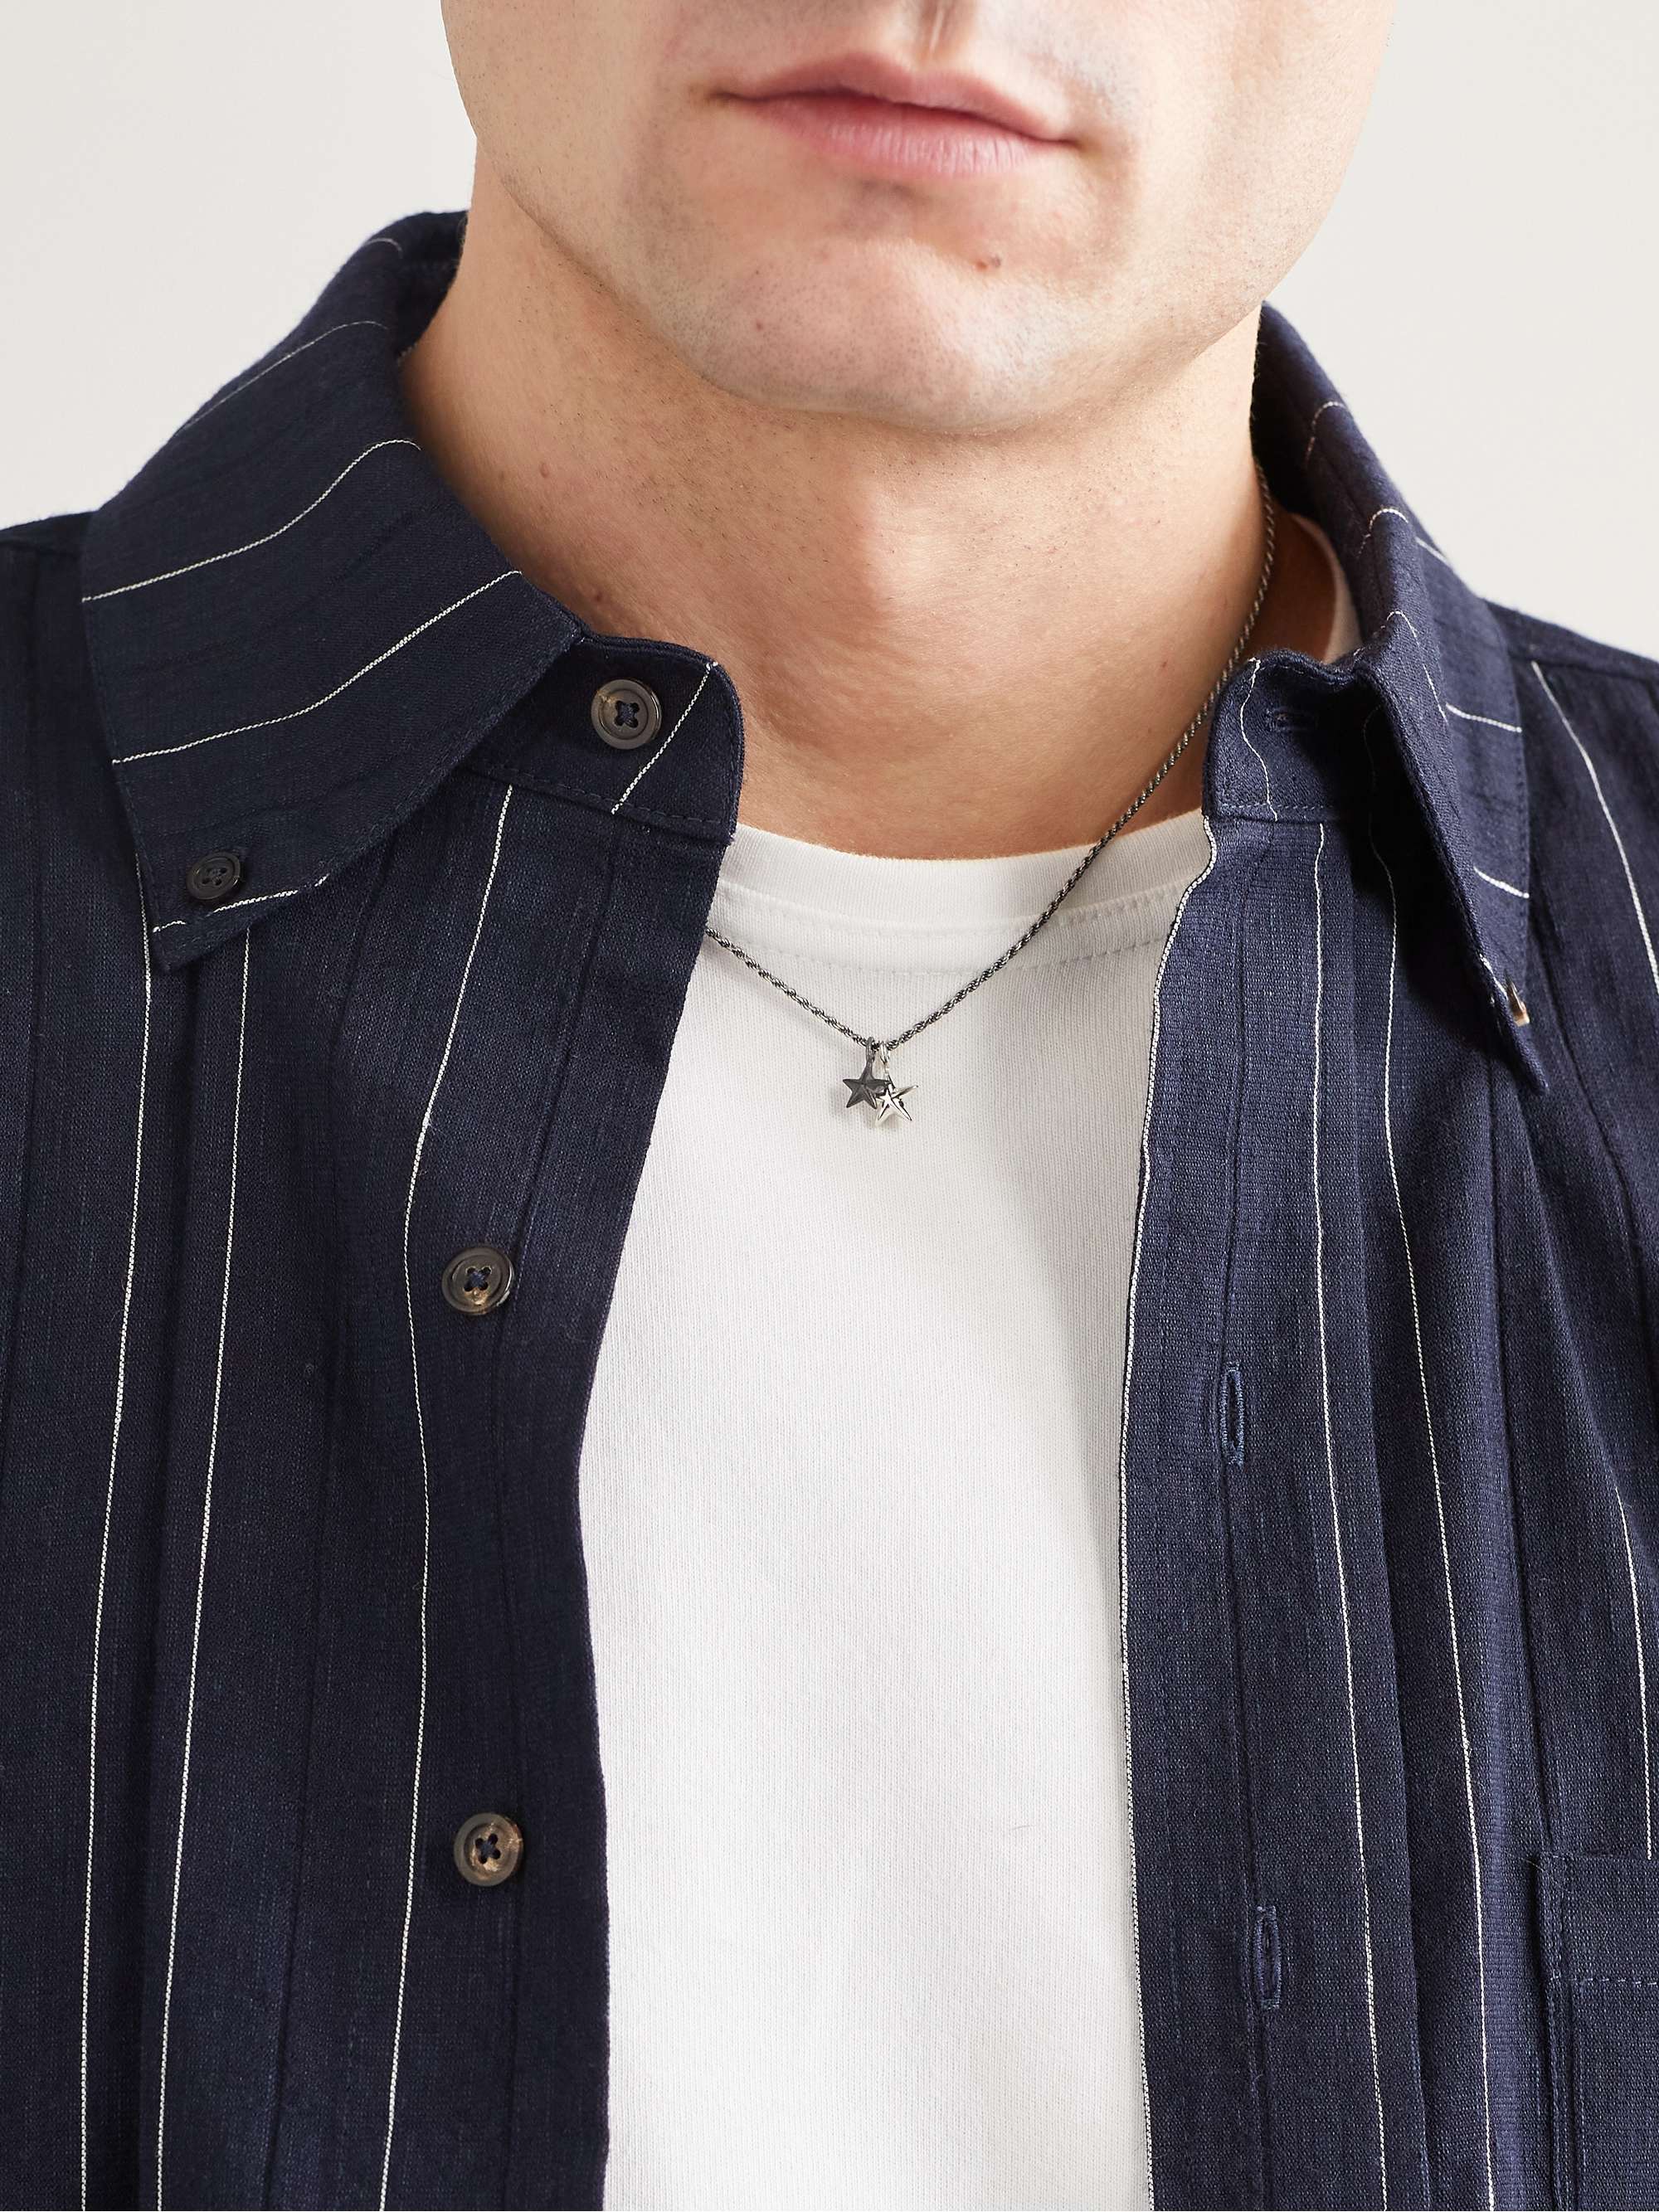 PAUL SMITH Silver- and Gunmetal-Tone Necklace for Men | MR PORTER